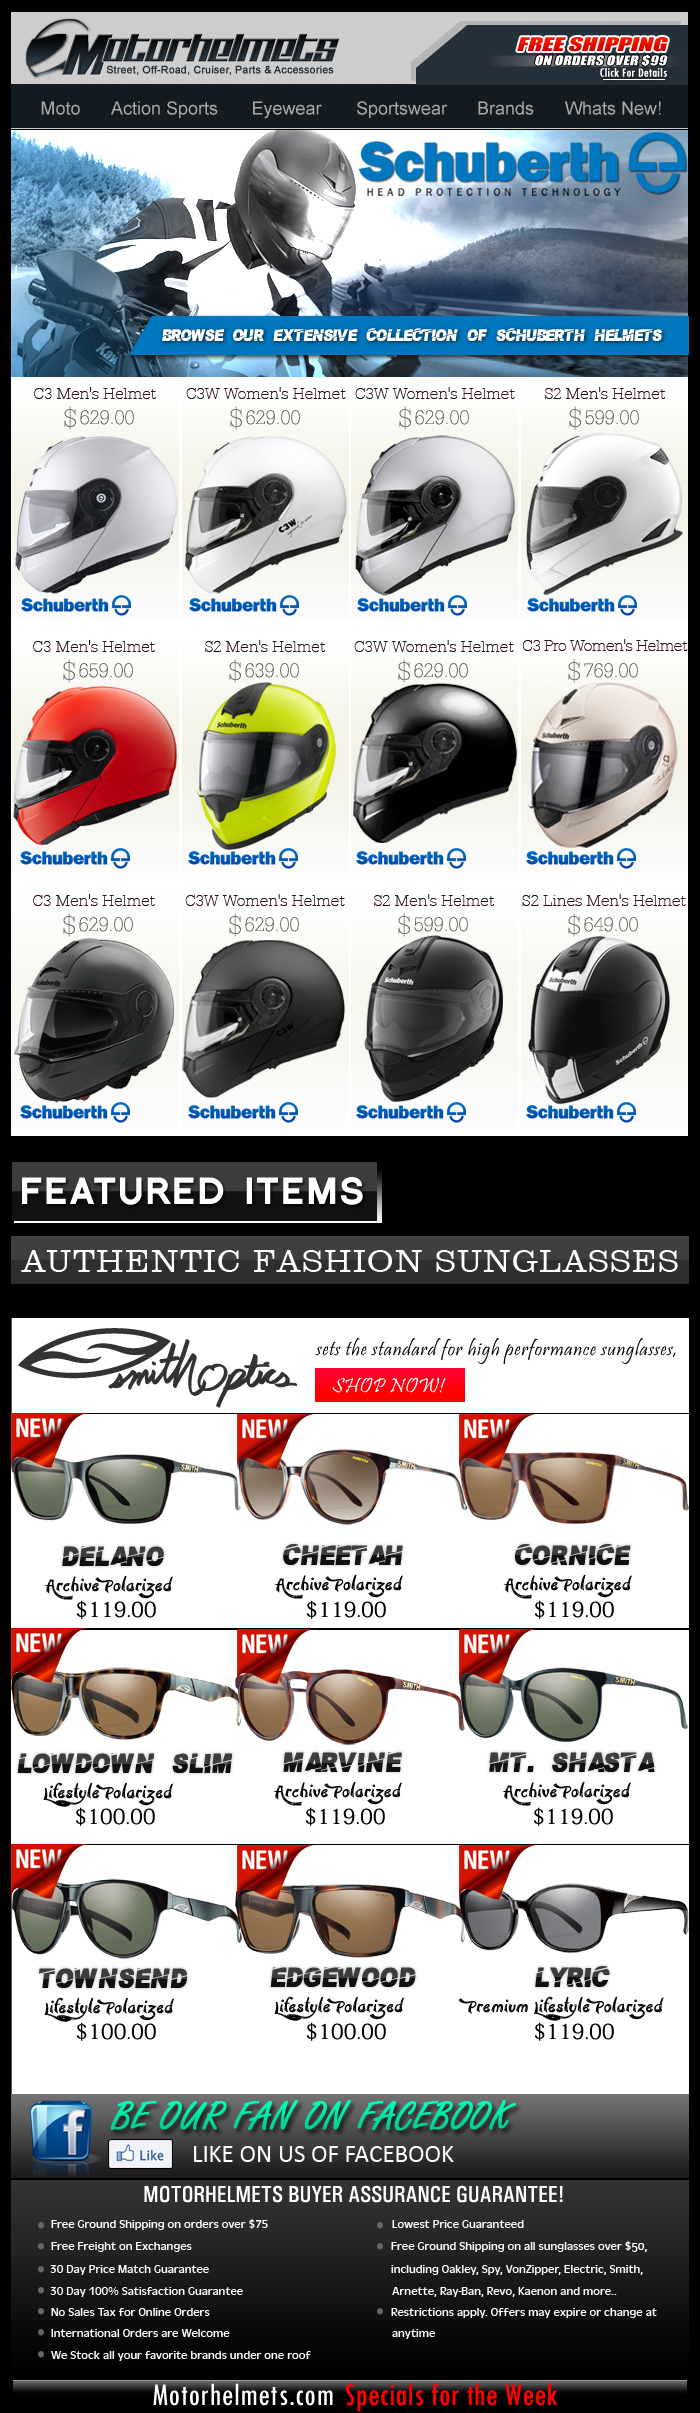 New Arrivals from Schuberth Helmets...see the entire collection!